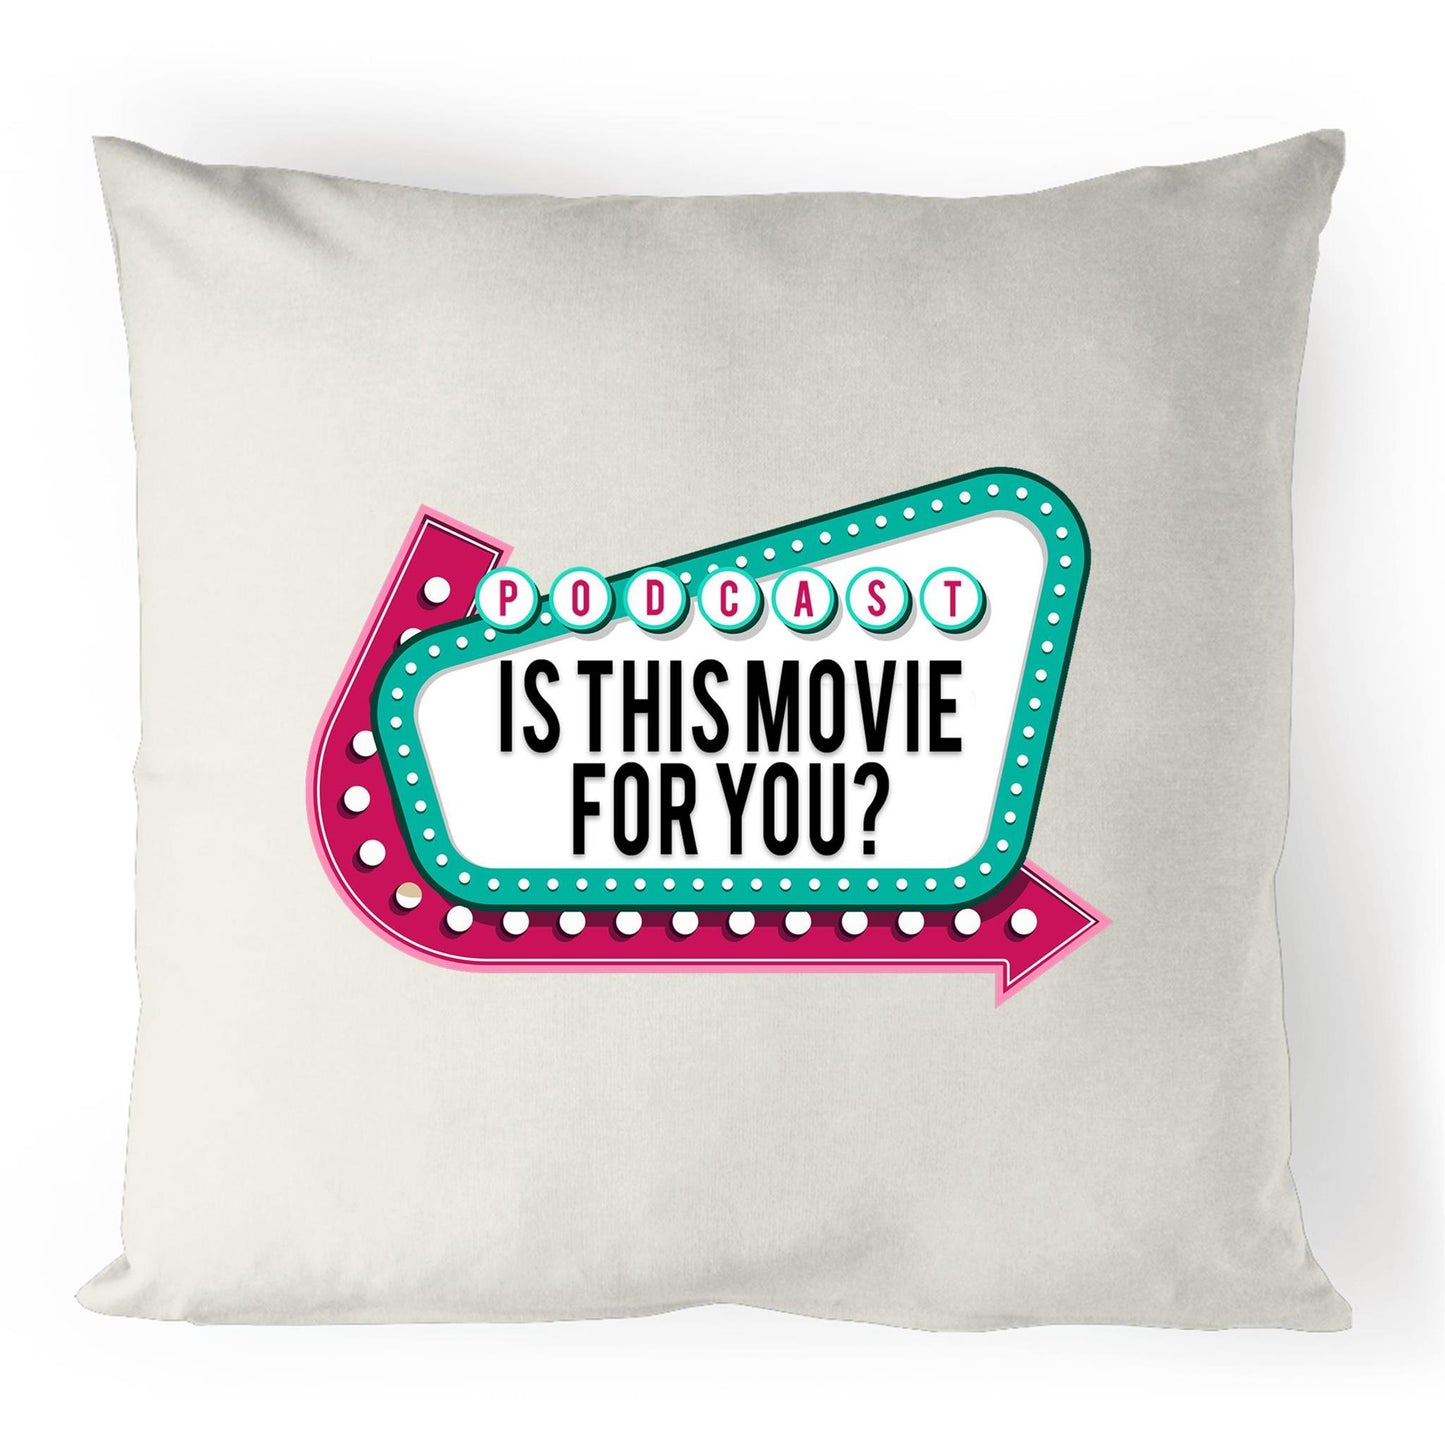 Is This Movie For You? - 100% Linen Cushion Cover